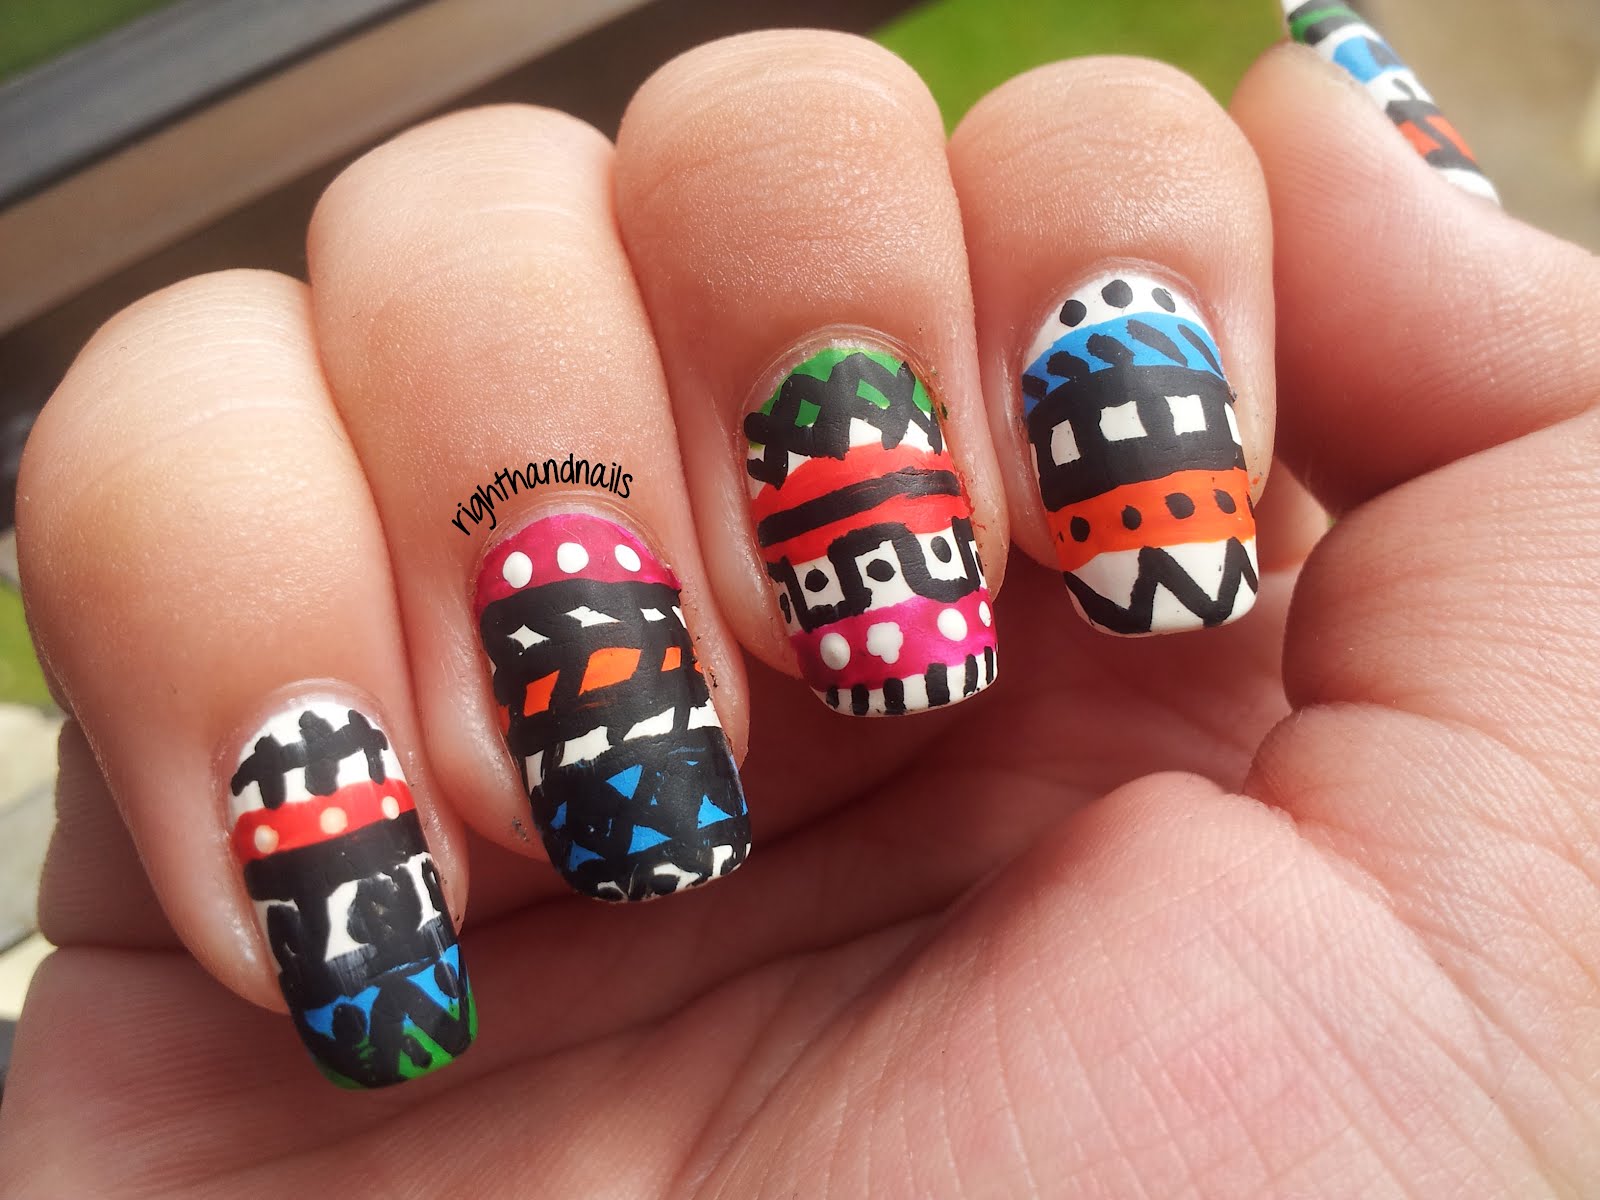 2. Tribal Nail Art Ideas for Beginners - wide 4